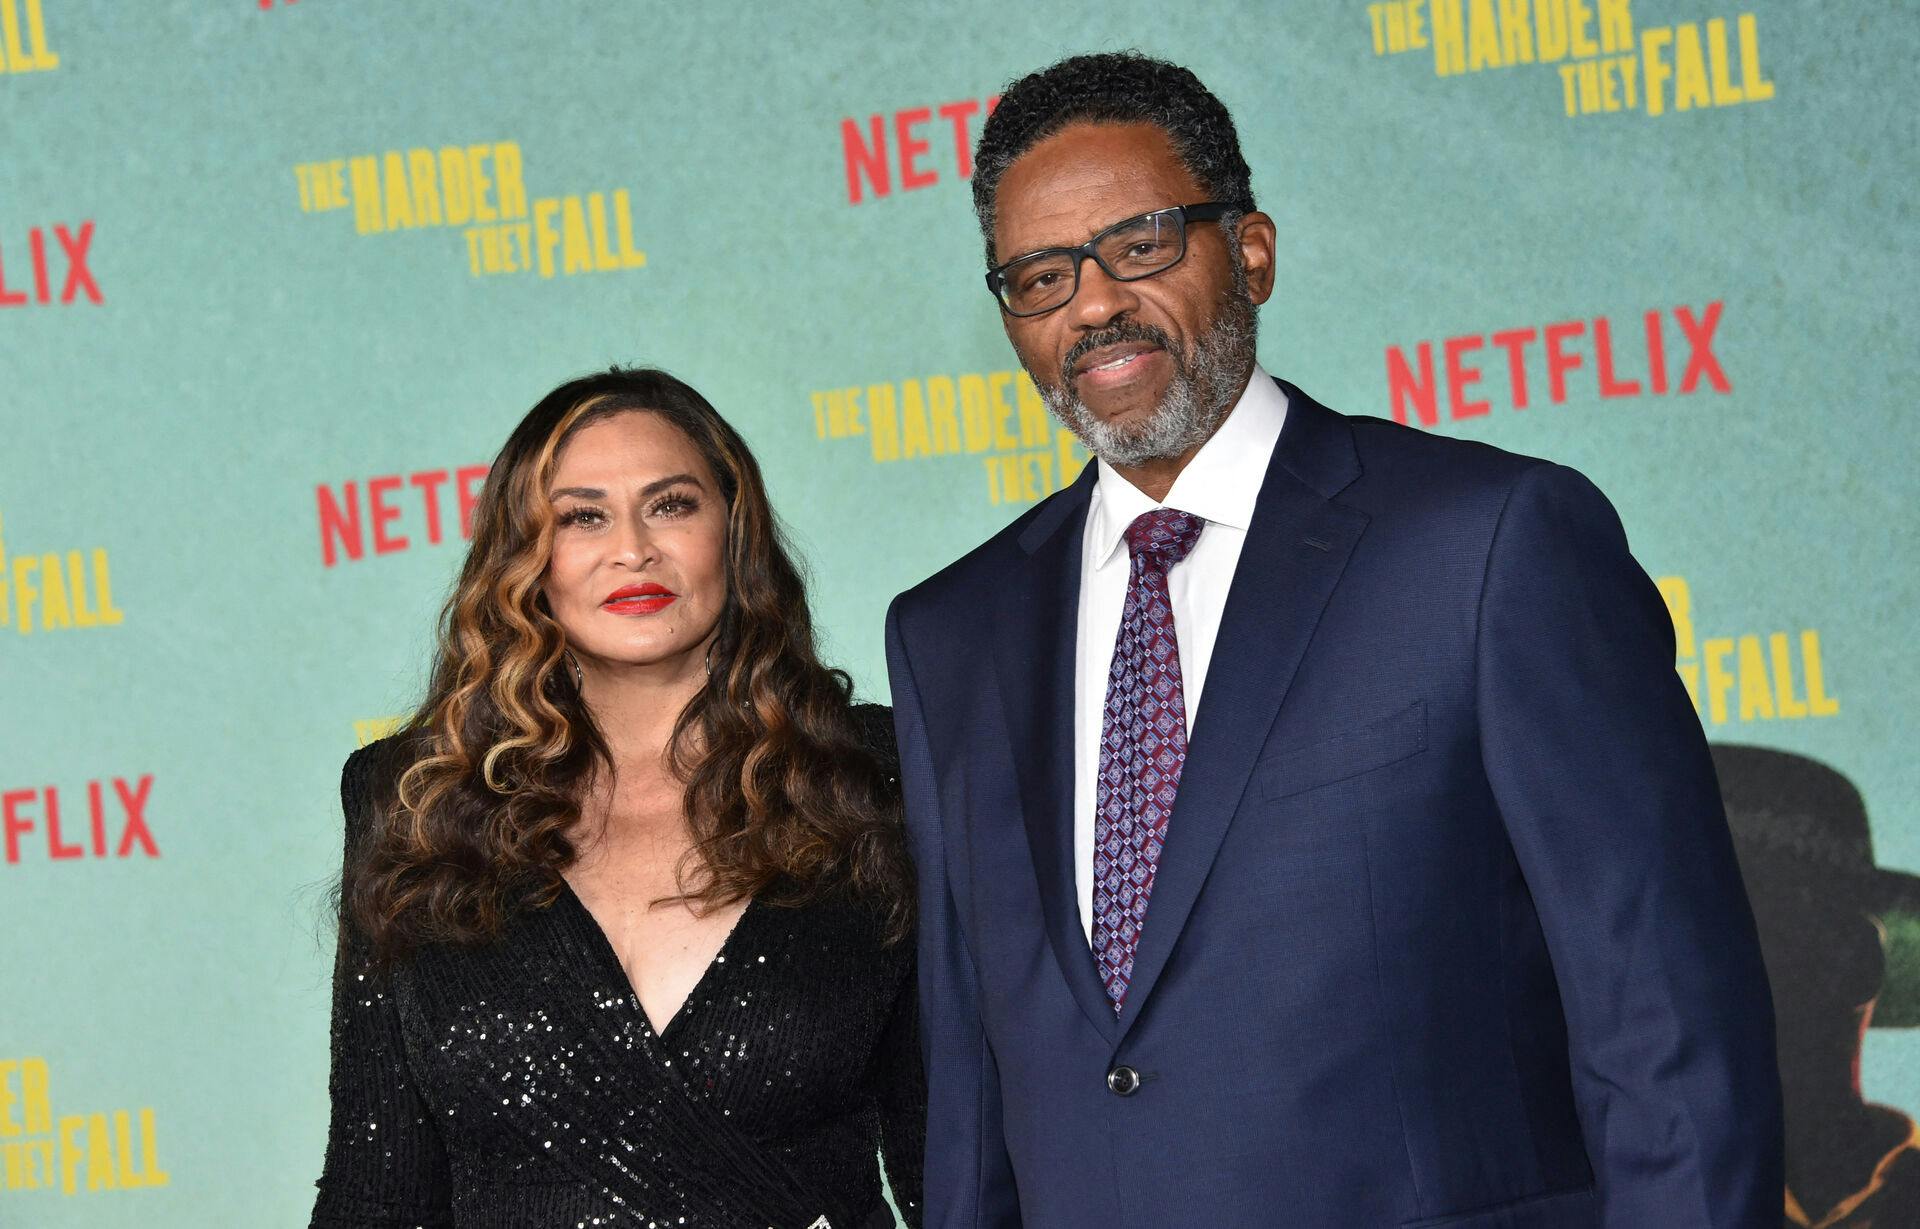 US businesswoman and fashion designer Tina Knowles (L) and husband actor Richard Lee Lawson arrive for the Los Angeles Special Screening of Netflix's "The Harder They Fall" at the Shrine Auditorium in Los Angeles, October 13, 2021. Chris DELMAS / AFP